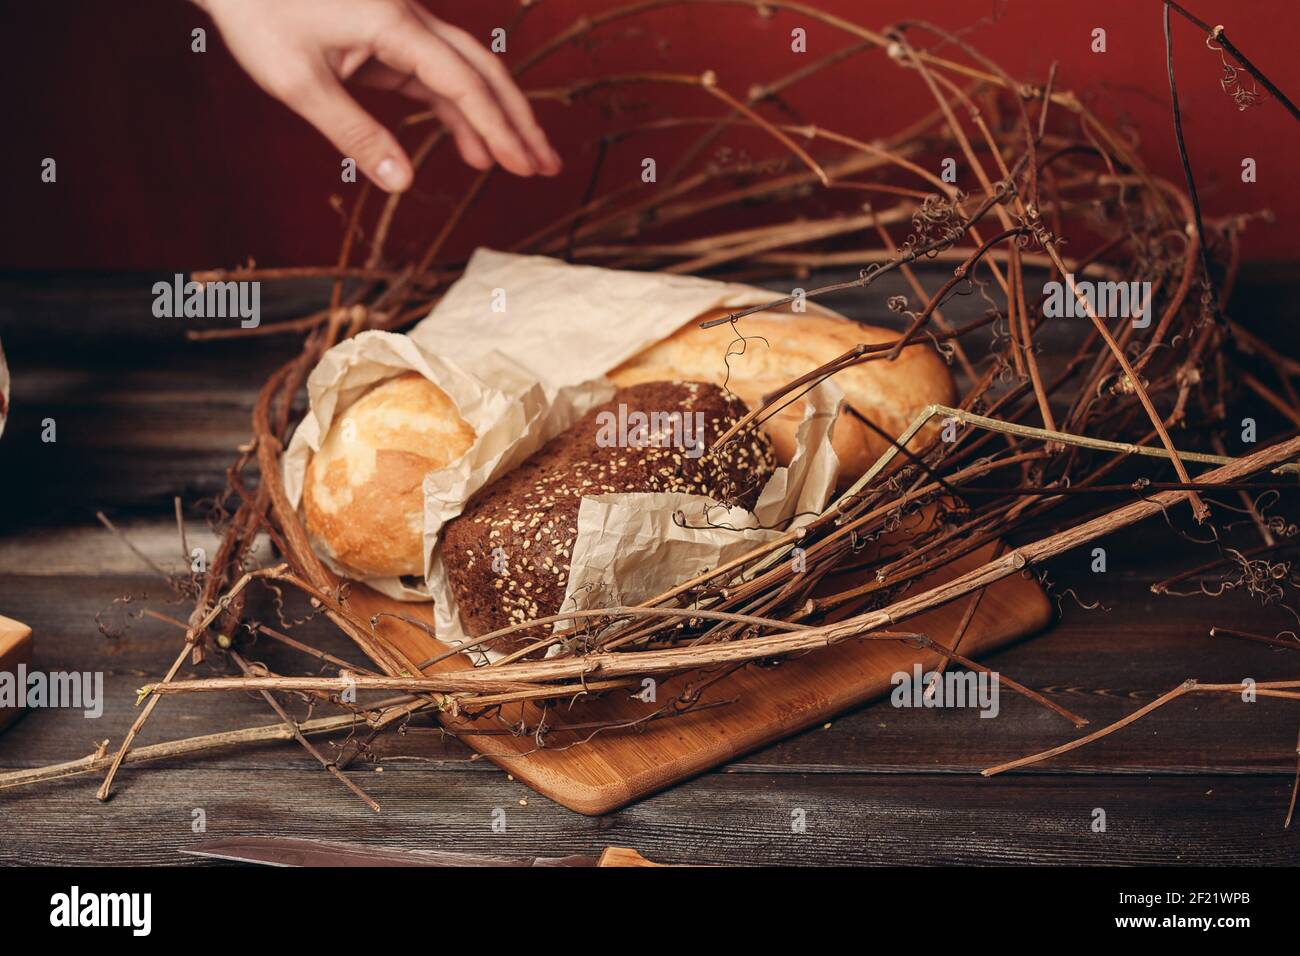 a loaf of bread lies on the branches of the nest on a wooden table